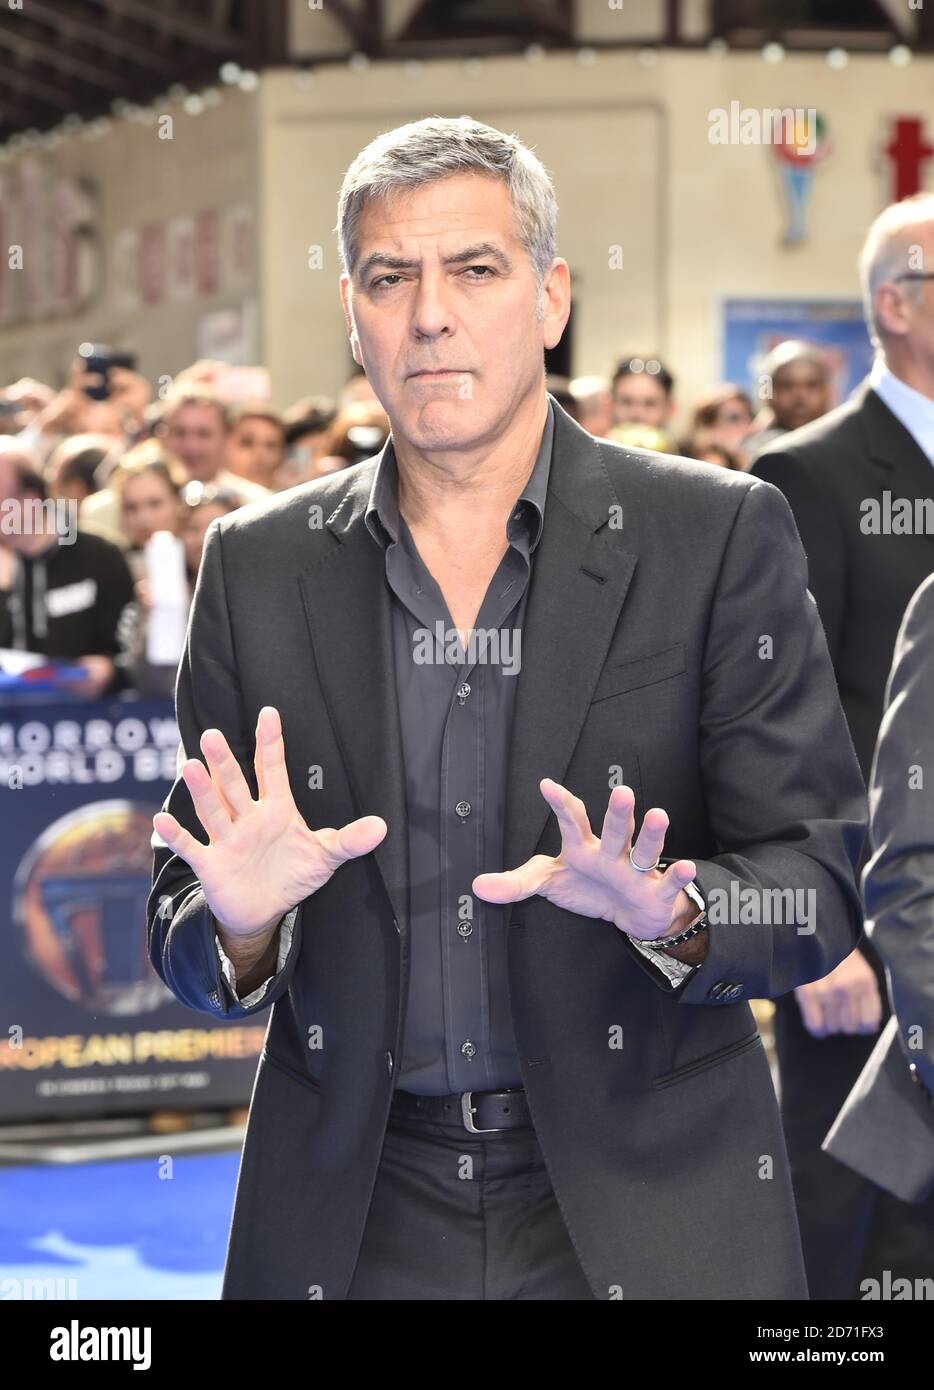 George Clooney attending the European Premiere of Disney's 'Tomorrowland A World Beyond' held at the Odeon Cinema Leicester Square, London  (Mandatory Credit: Matt Crossick/ Empics Entertainment) Stock Photo